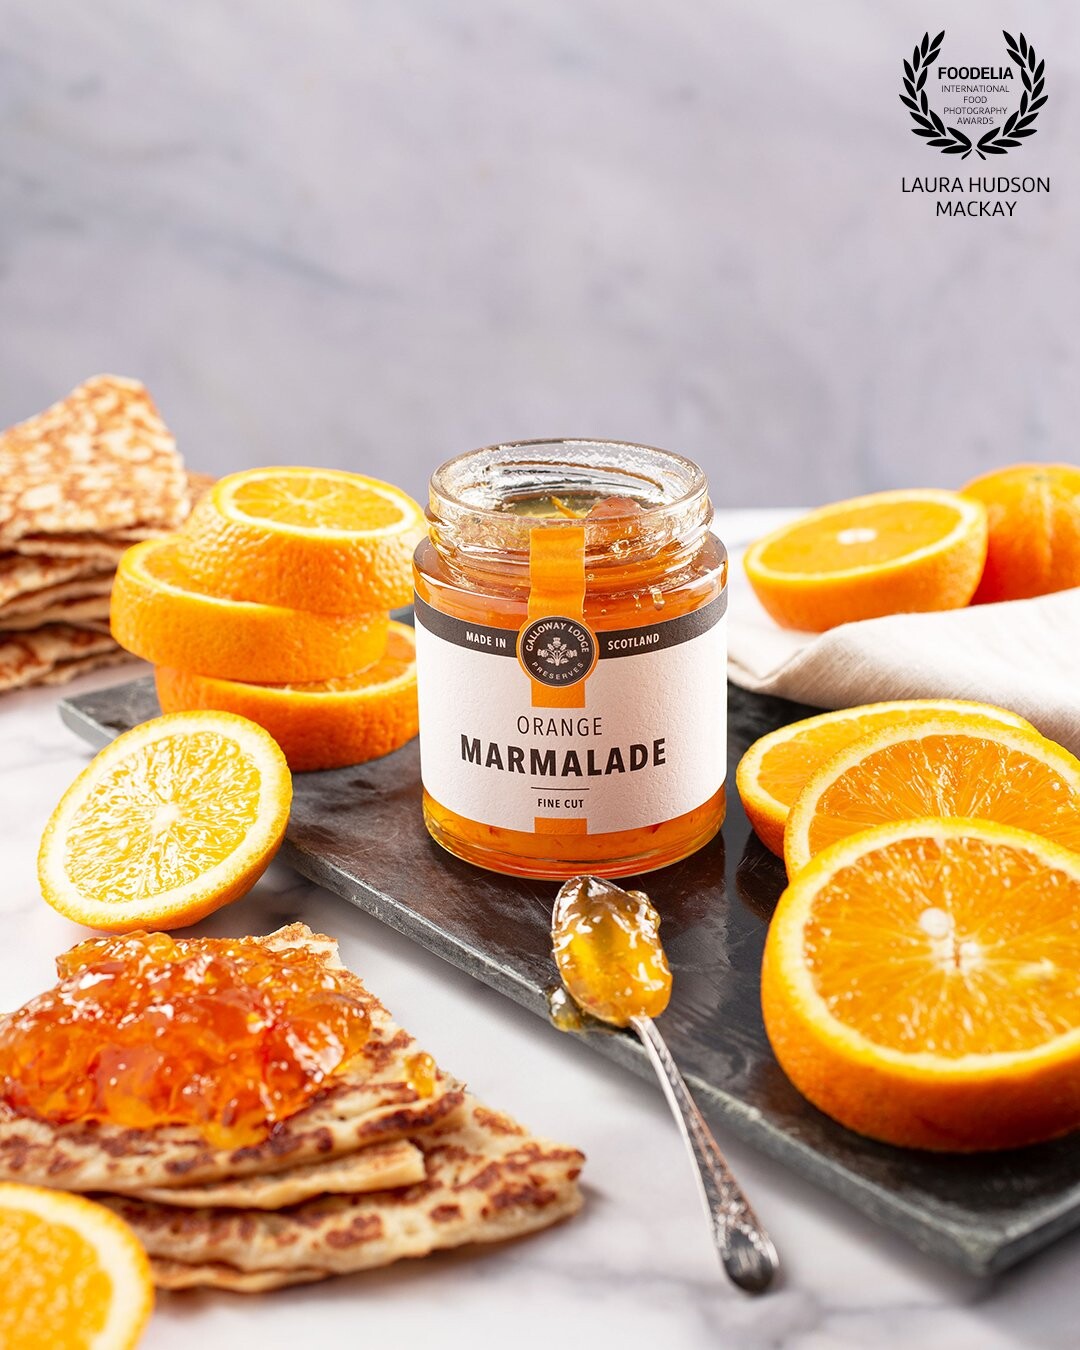 Super fresh and tangy, nothing beats this orange marmalade spread on top of warm pancakes. I chose muted tones for the surface and props which helps the oranges and the marmalade POP!